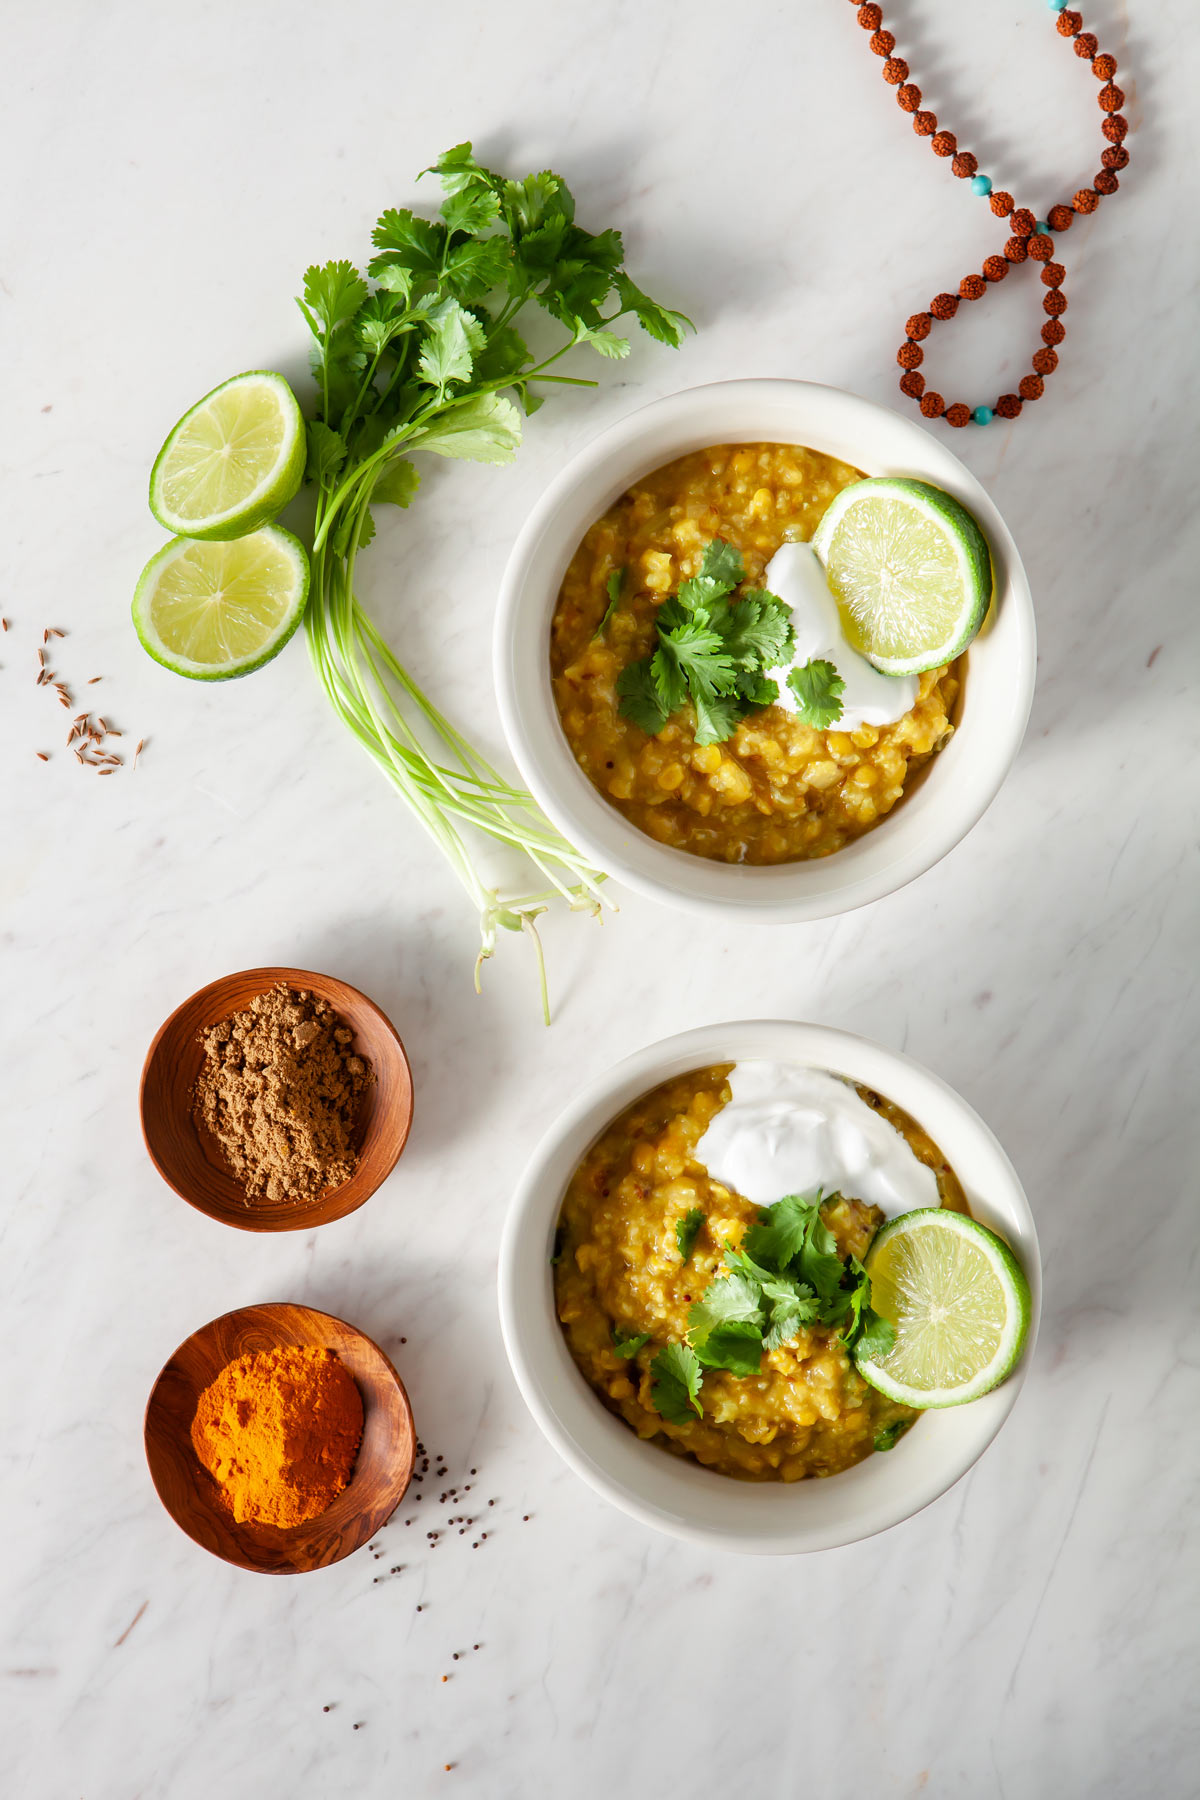 Two beautiful bowls of healing Kitchari - also known as Khichdi - with spices and fresh coriander root beside them